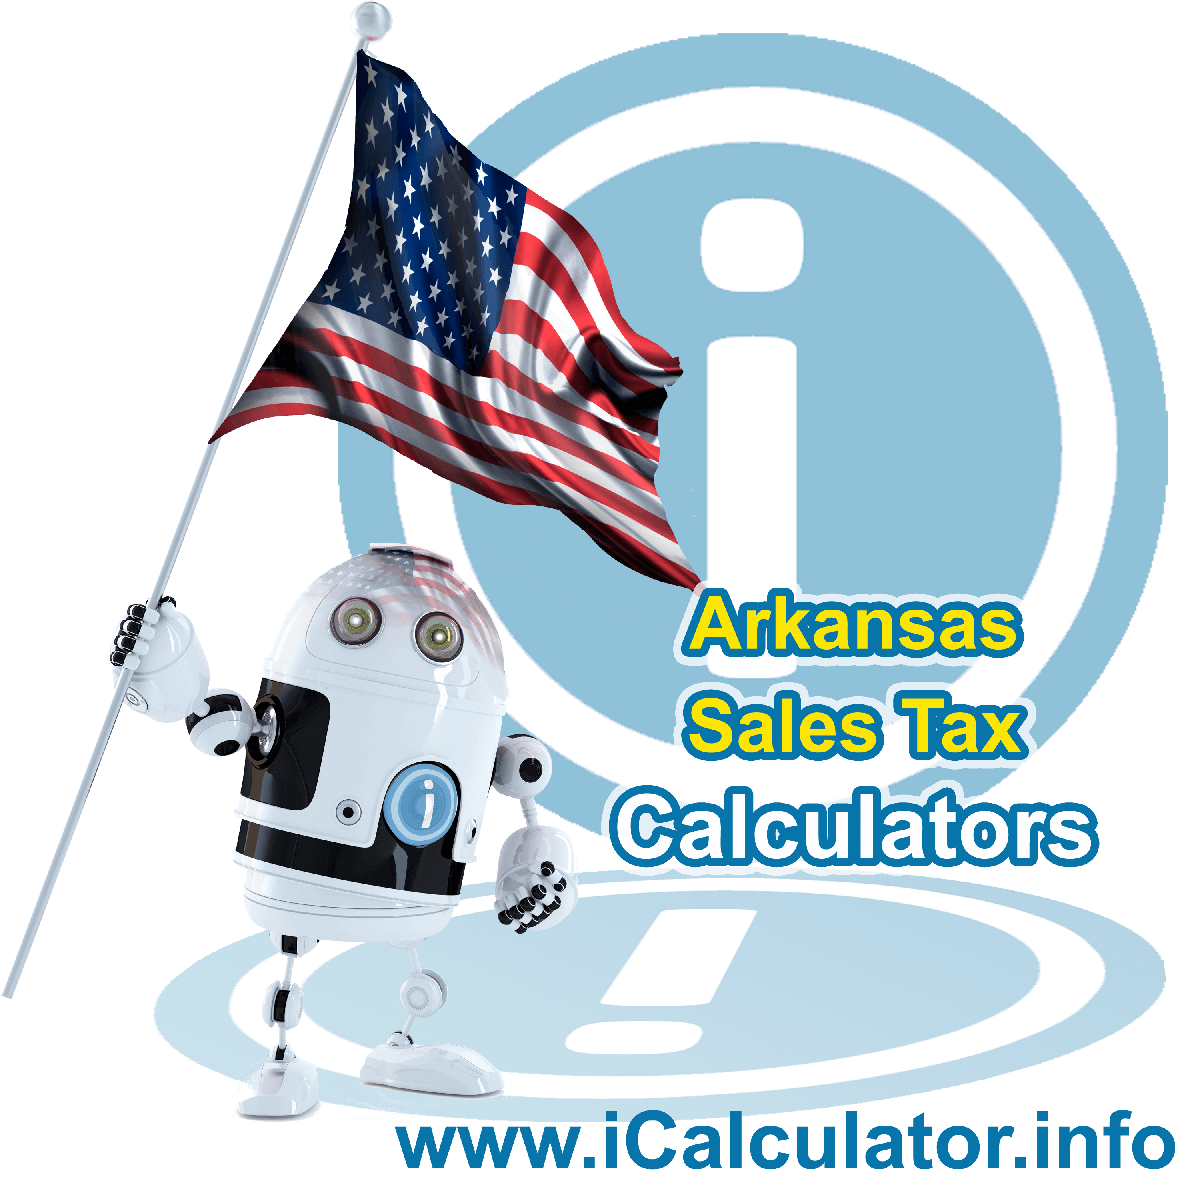 Harrison Sales Rates: This image illustrates a calculator robot calculating Harrison sales tax manually using the Harrison Sales Tax Formula. You can use this information to calculate Harrison Sales Tax manually or use the Harrison Sales Tax Calculator to calculate sales tax online.